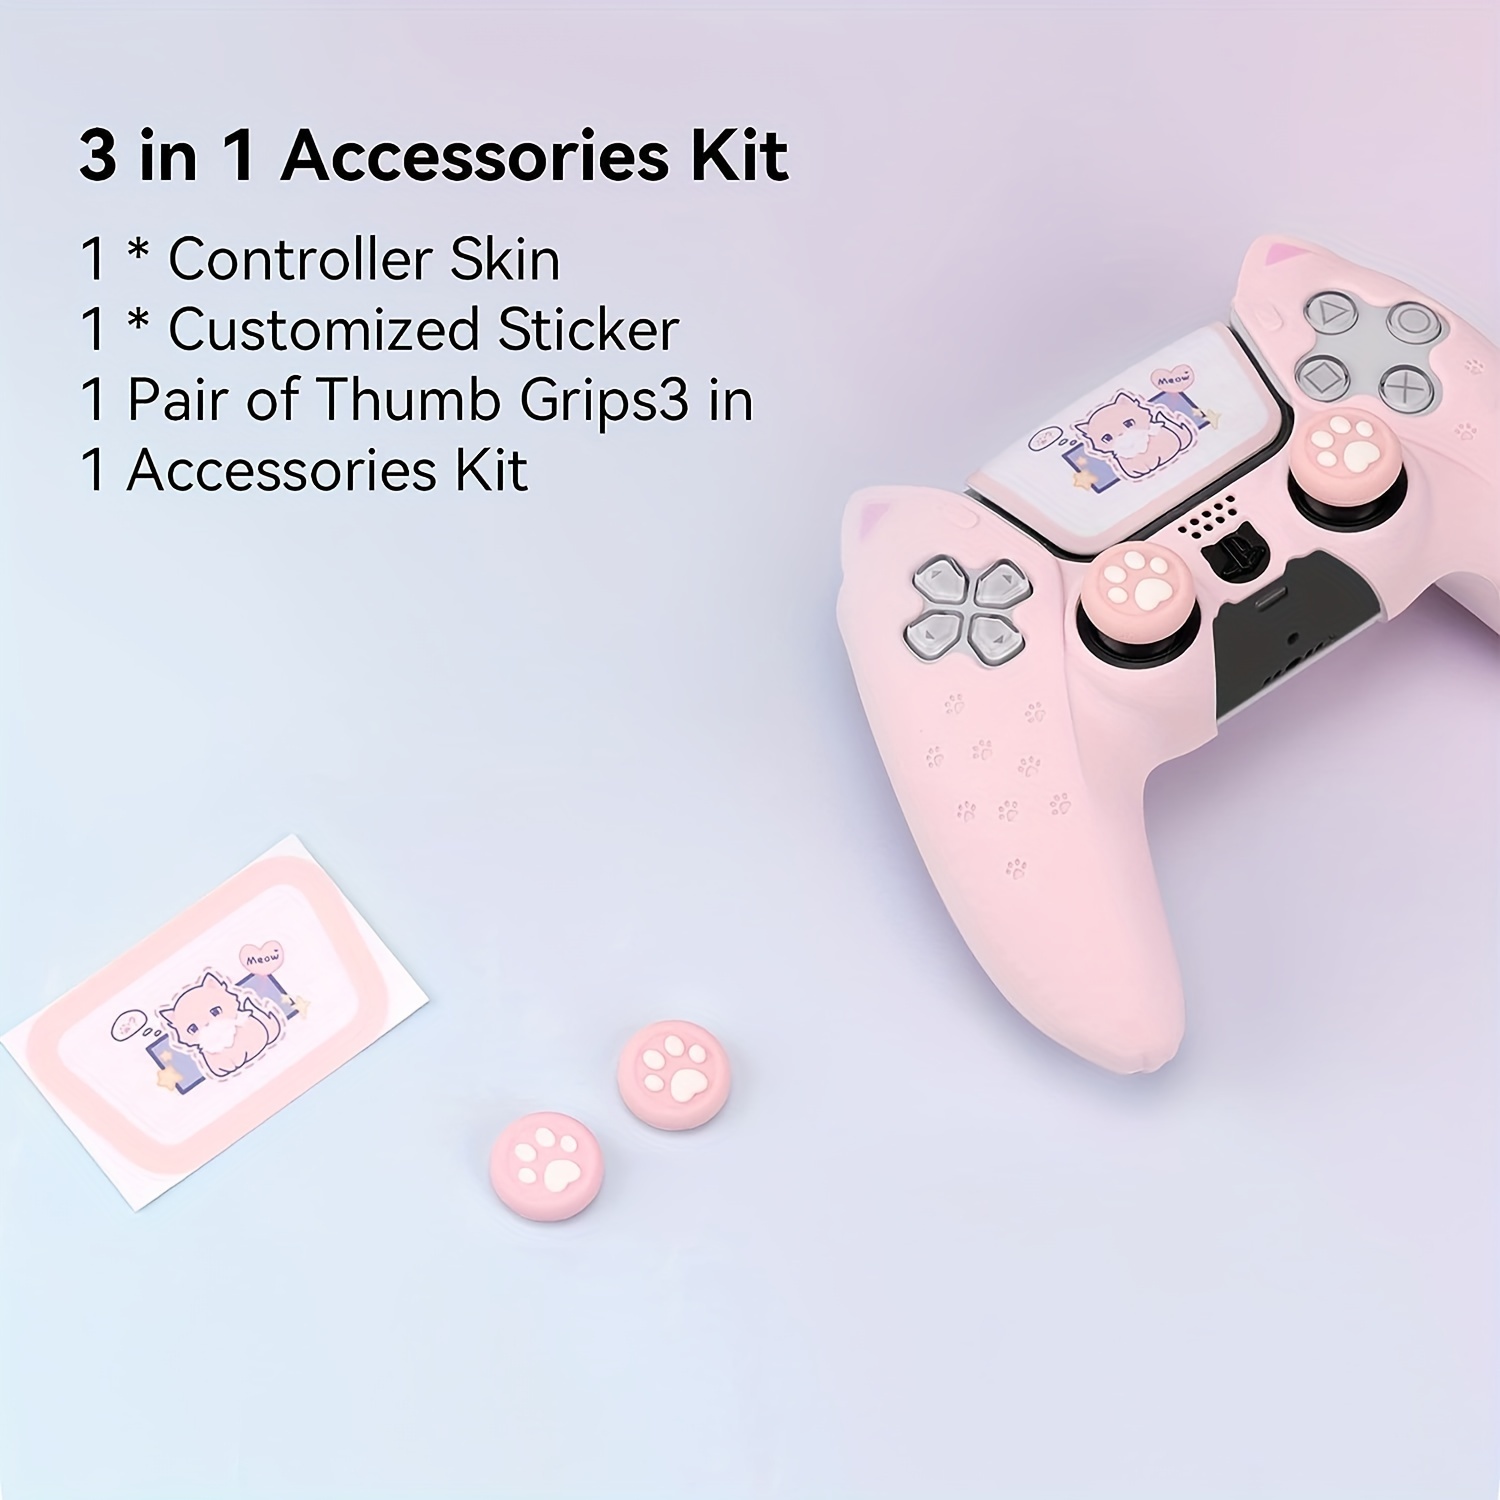 Protection en Silicone pour Manette PS5 - KIT Silicone